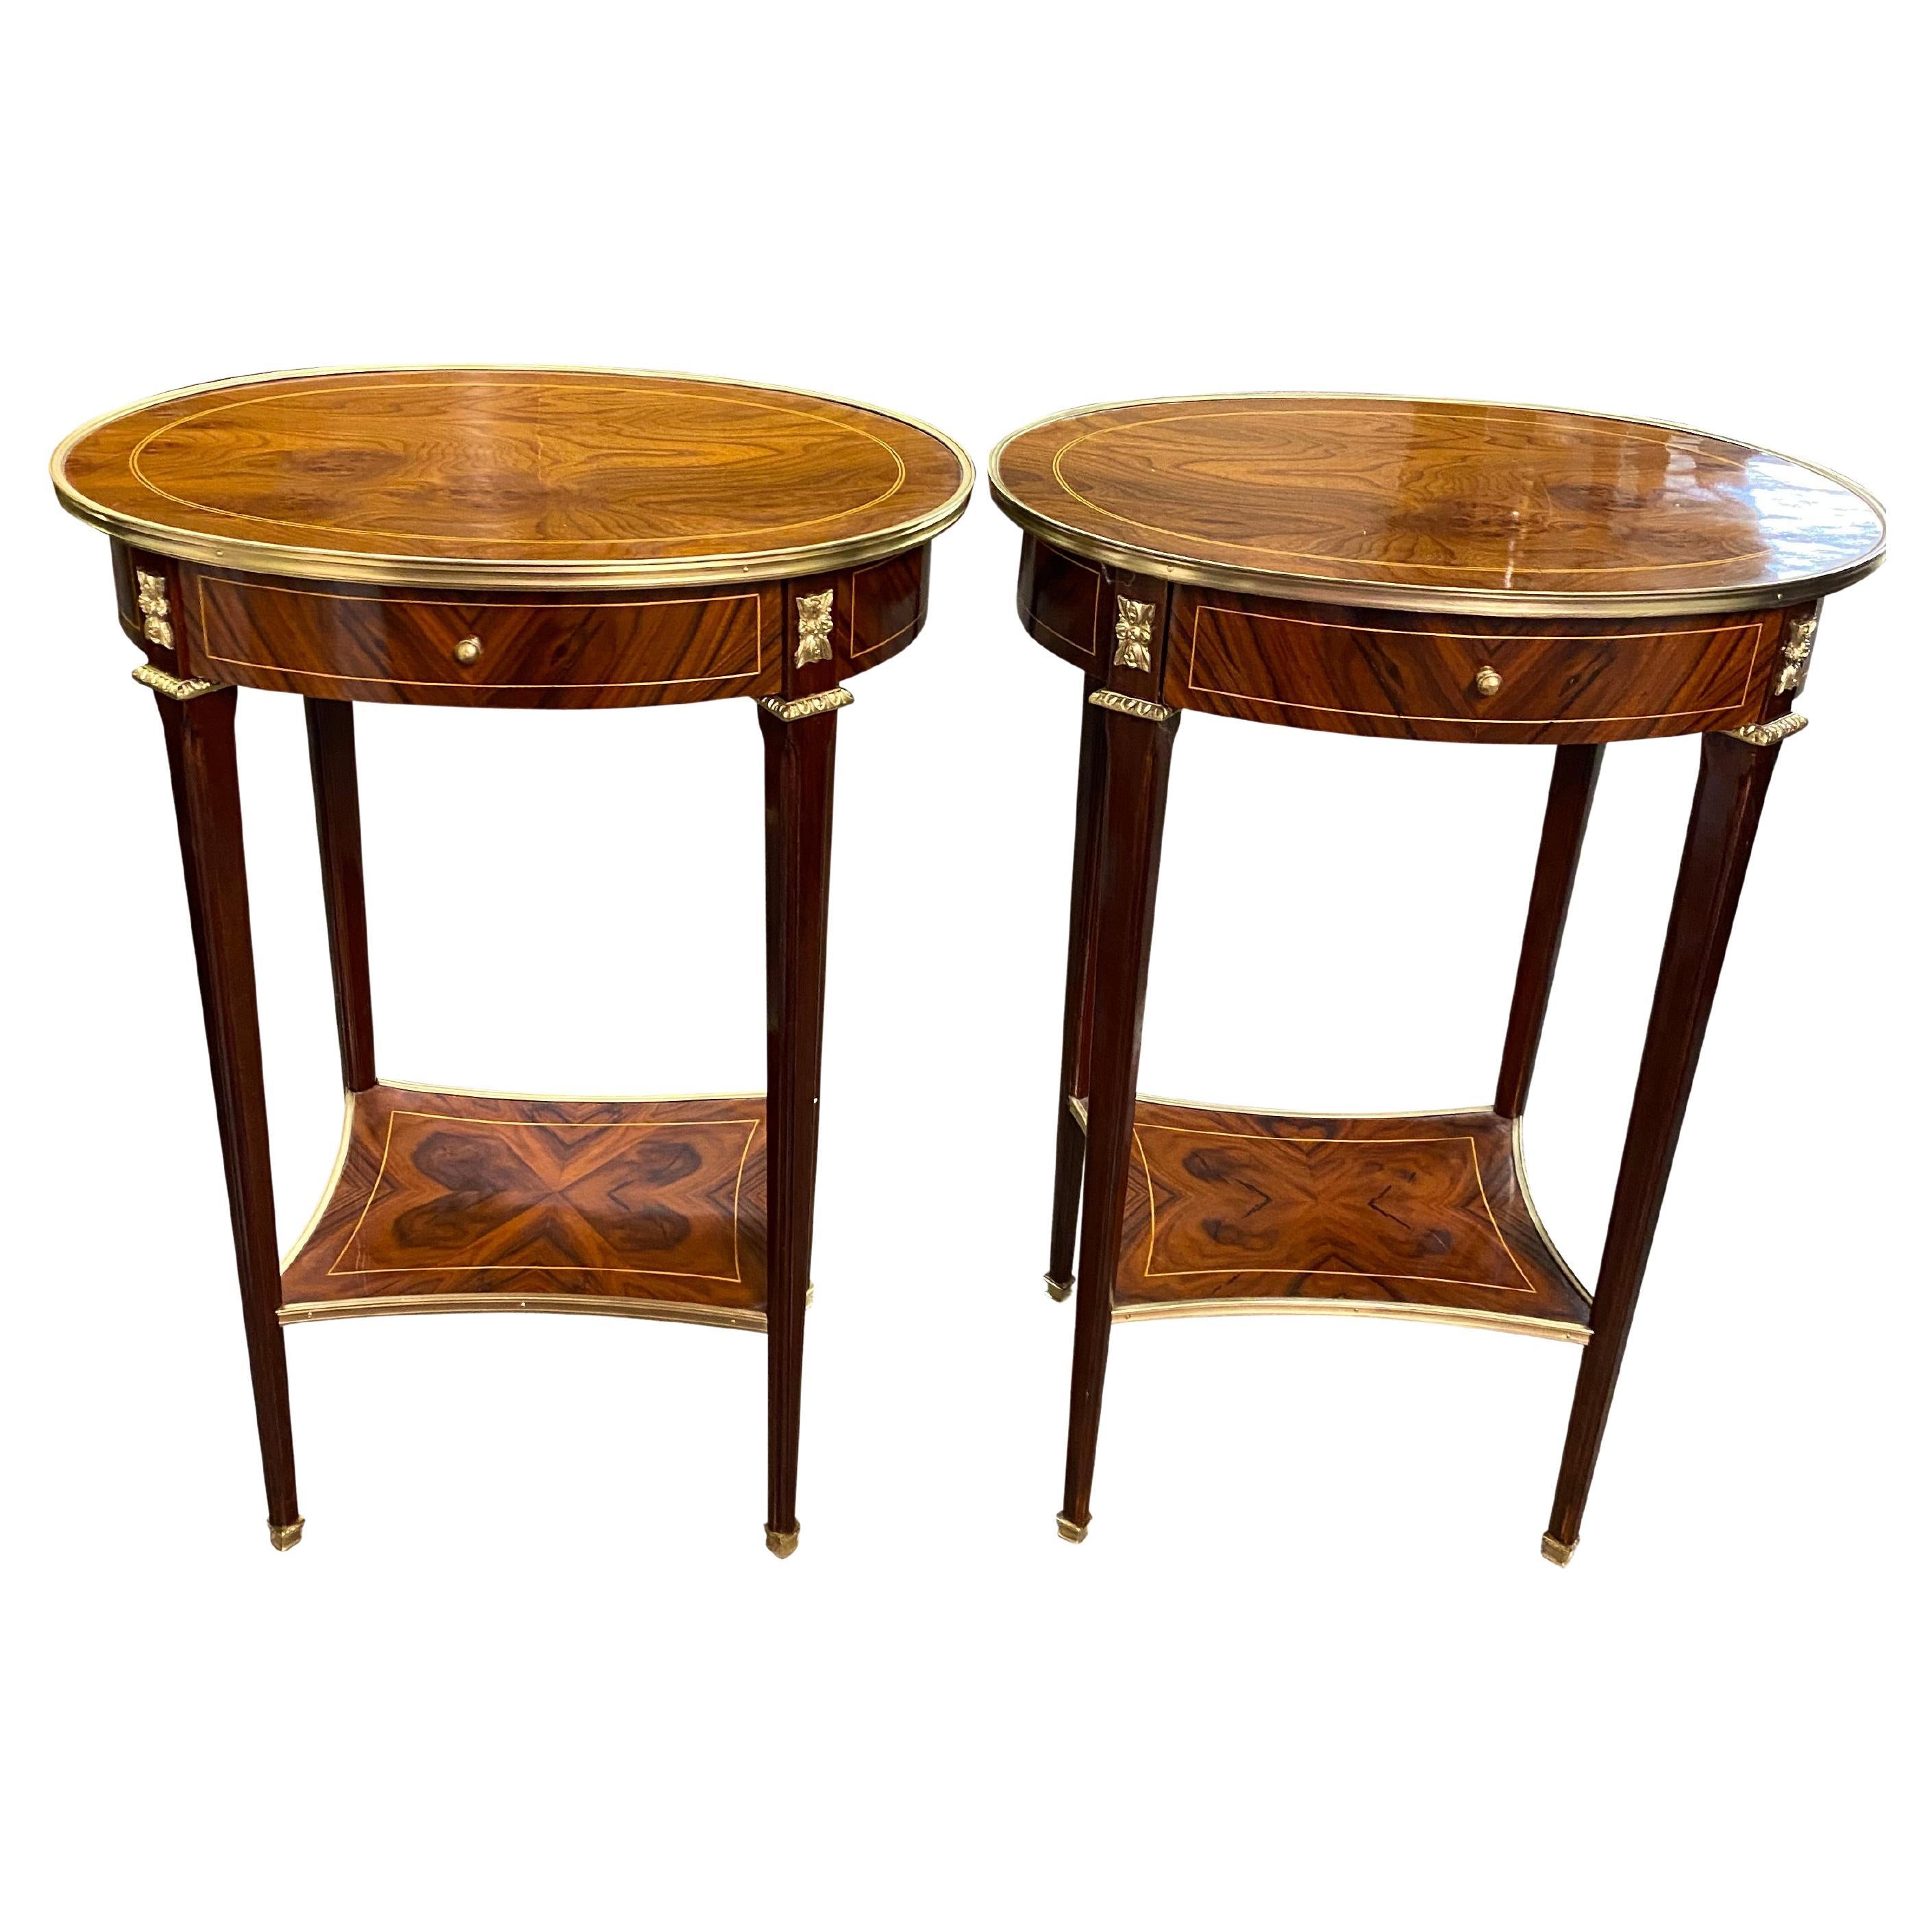 Pair of Oval Top 20th Century English Regency Style Side Tables For Sale